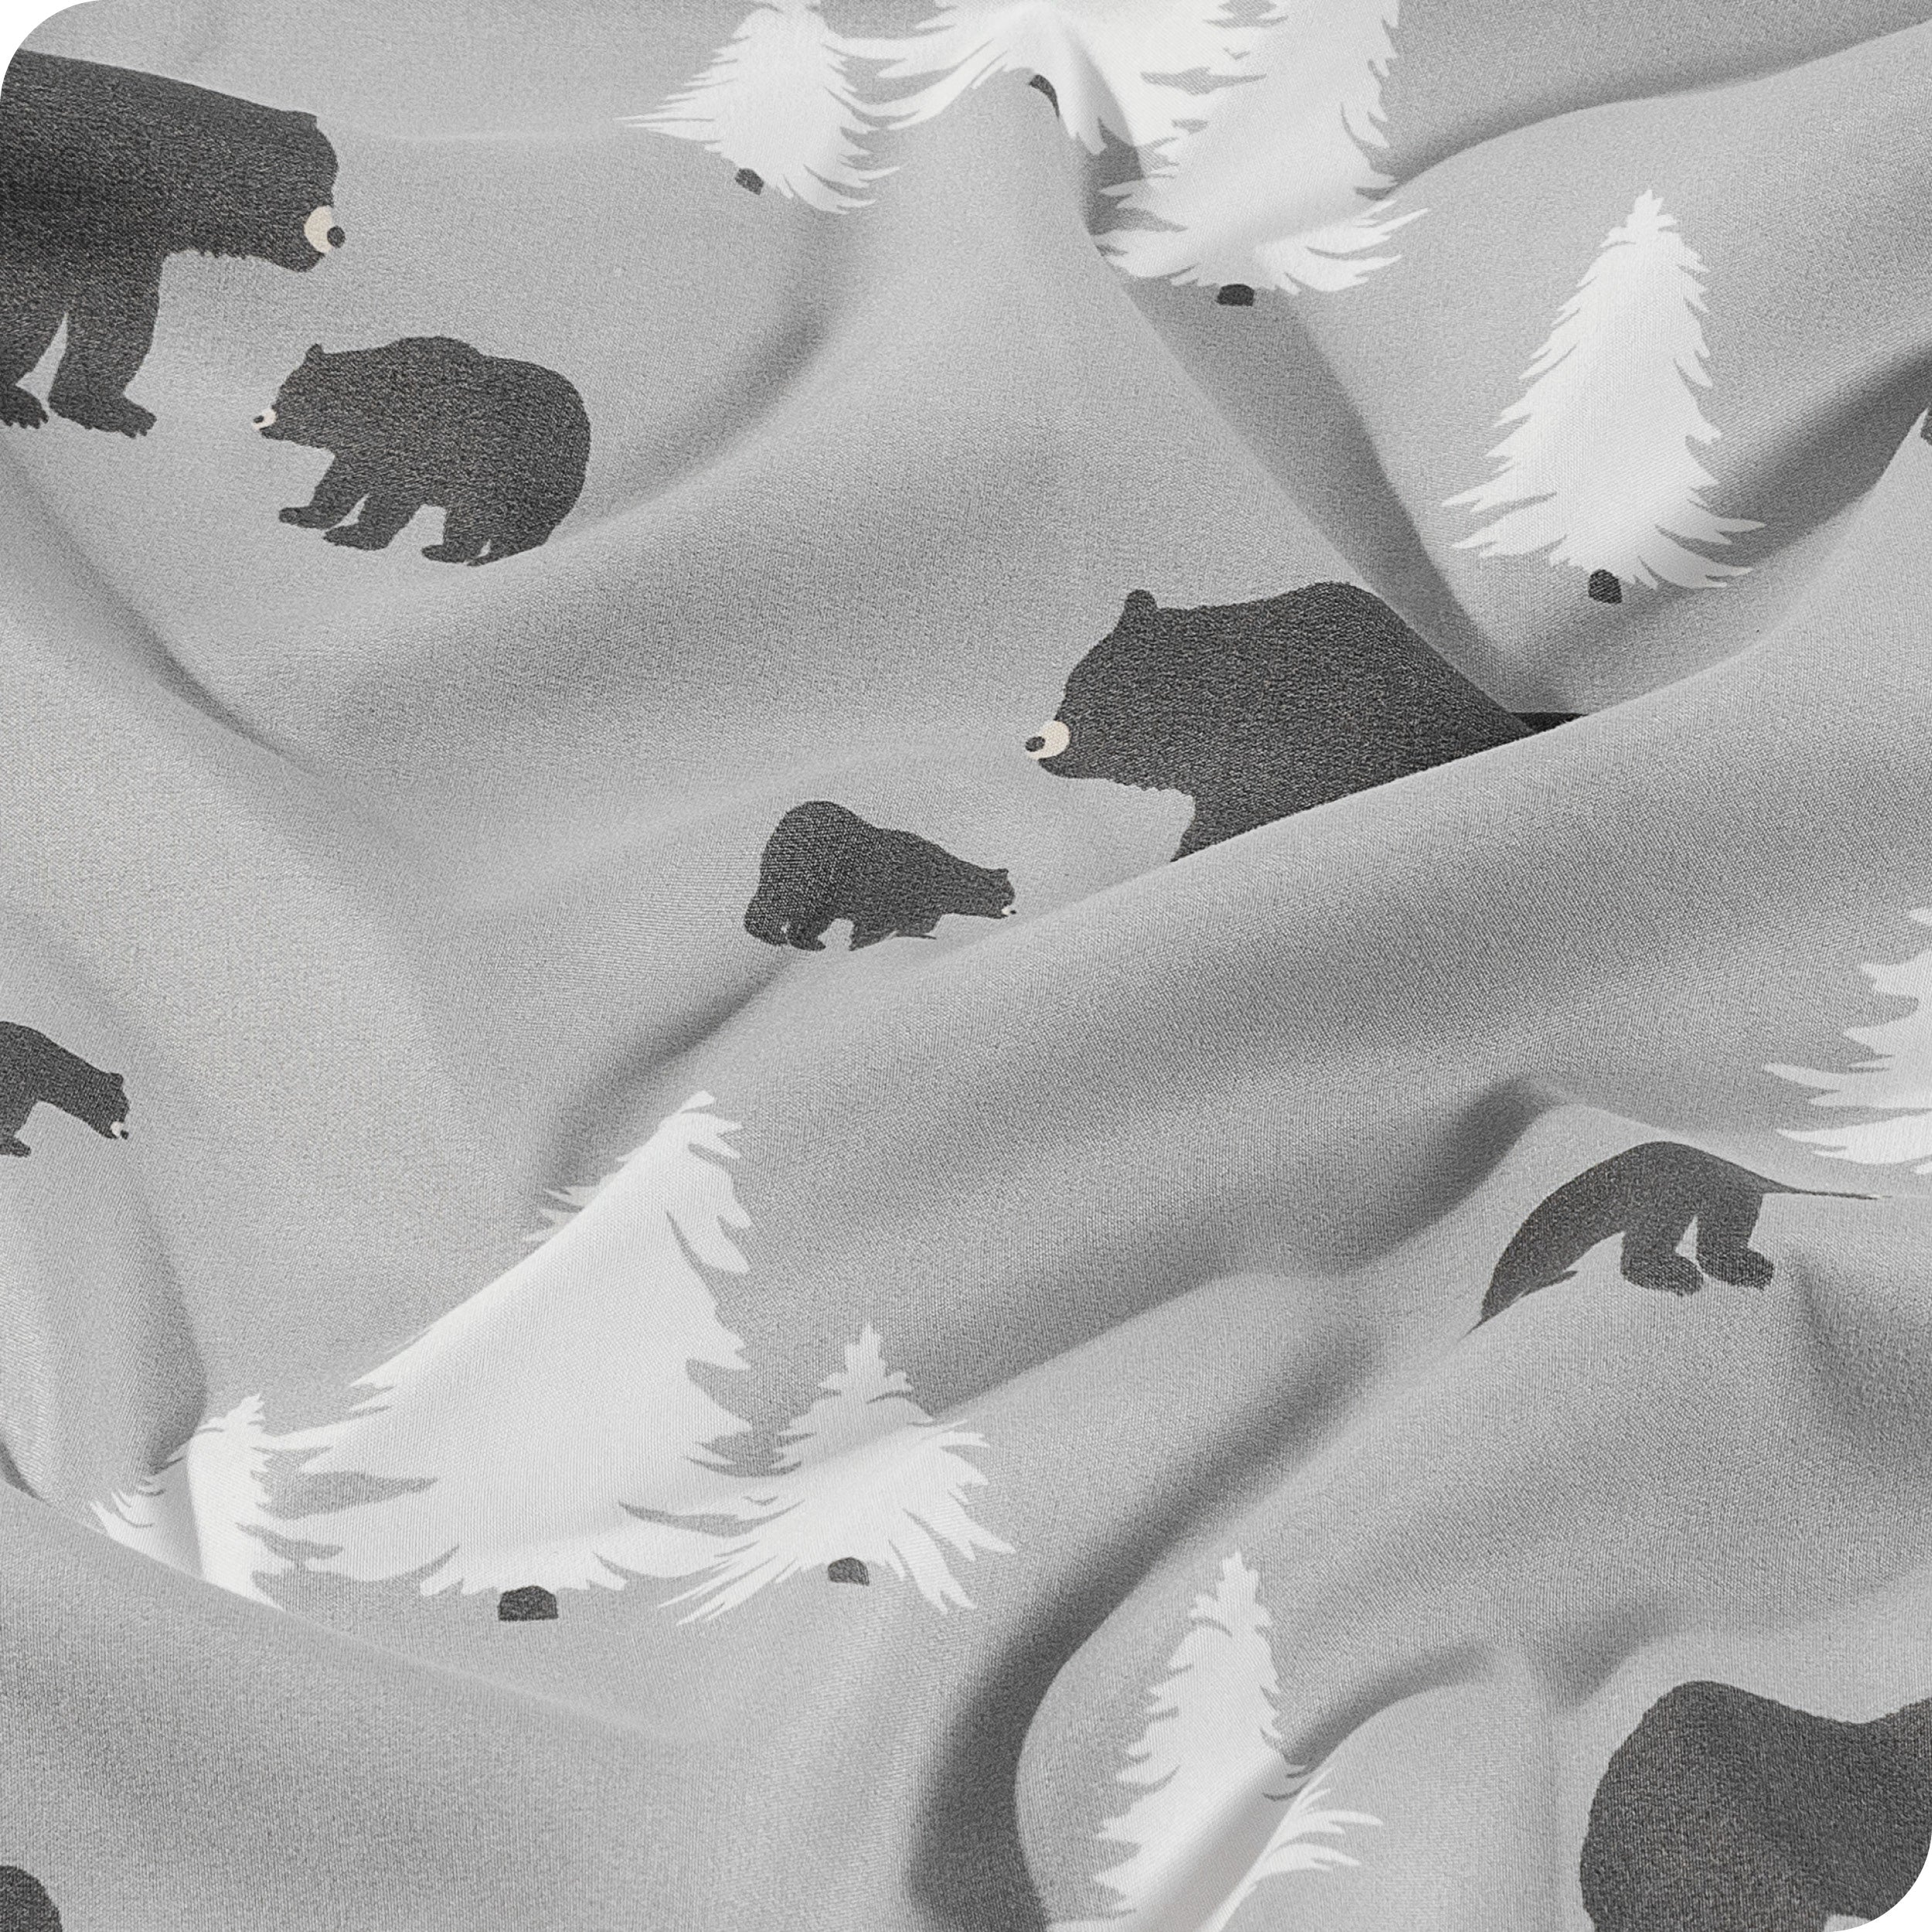 A close up view showing the pattern and texture of the microfiber sheet.